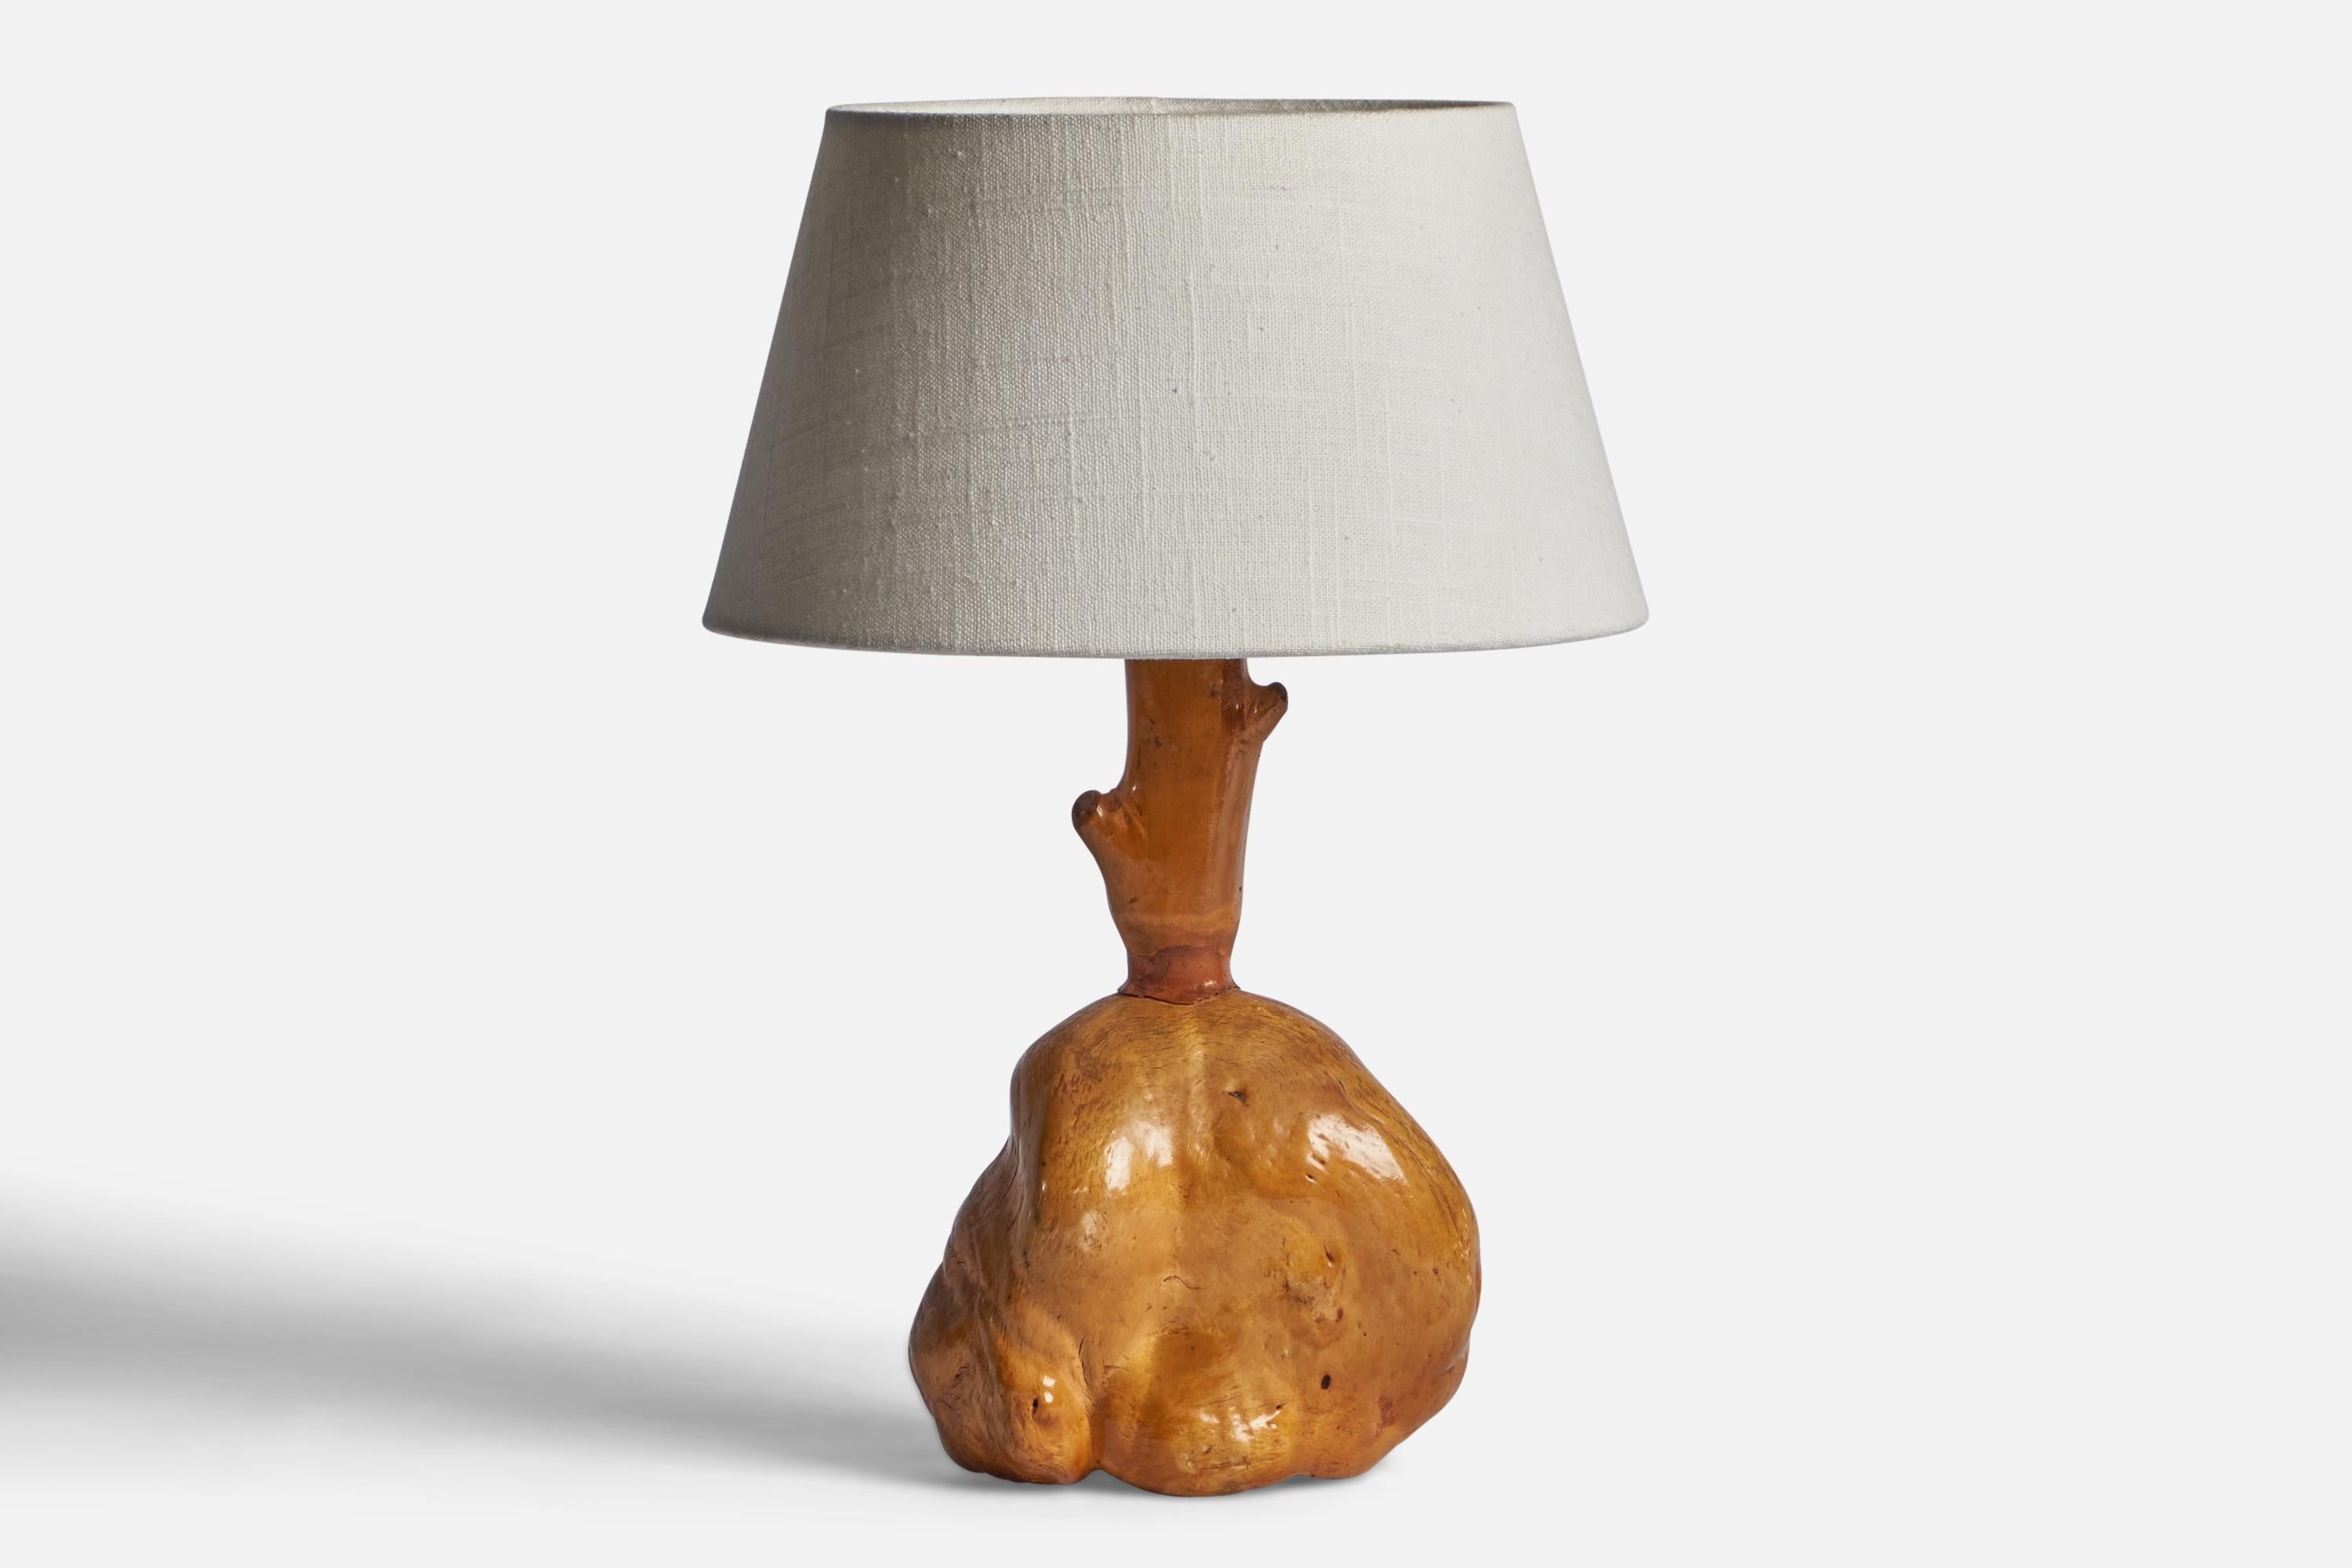 A freeform burl wood table lamp designed and produced in Sweden, c. 1960s.

Dimensions of Lamp (inches): 11.55” H x 6.25” Diameter
Dimensions of Shade (inches): 7” Top Diameter x 10” Bottom Diameter x 5.5” H 
Dimensions of Lamp with Shade (inches):